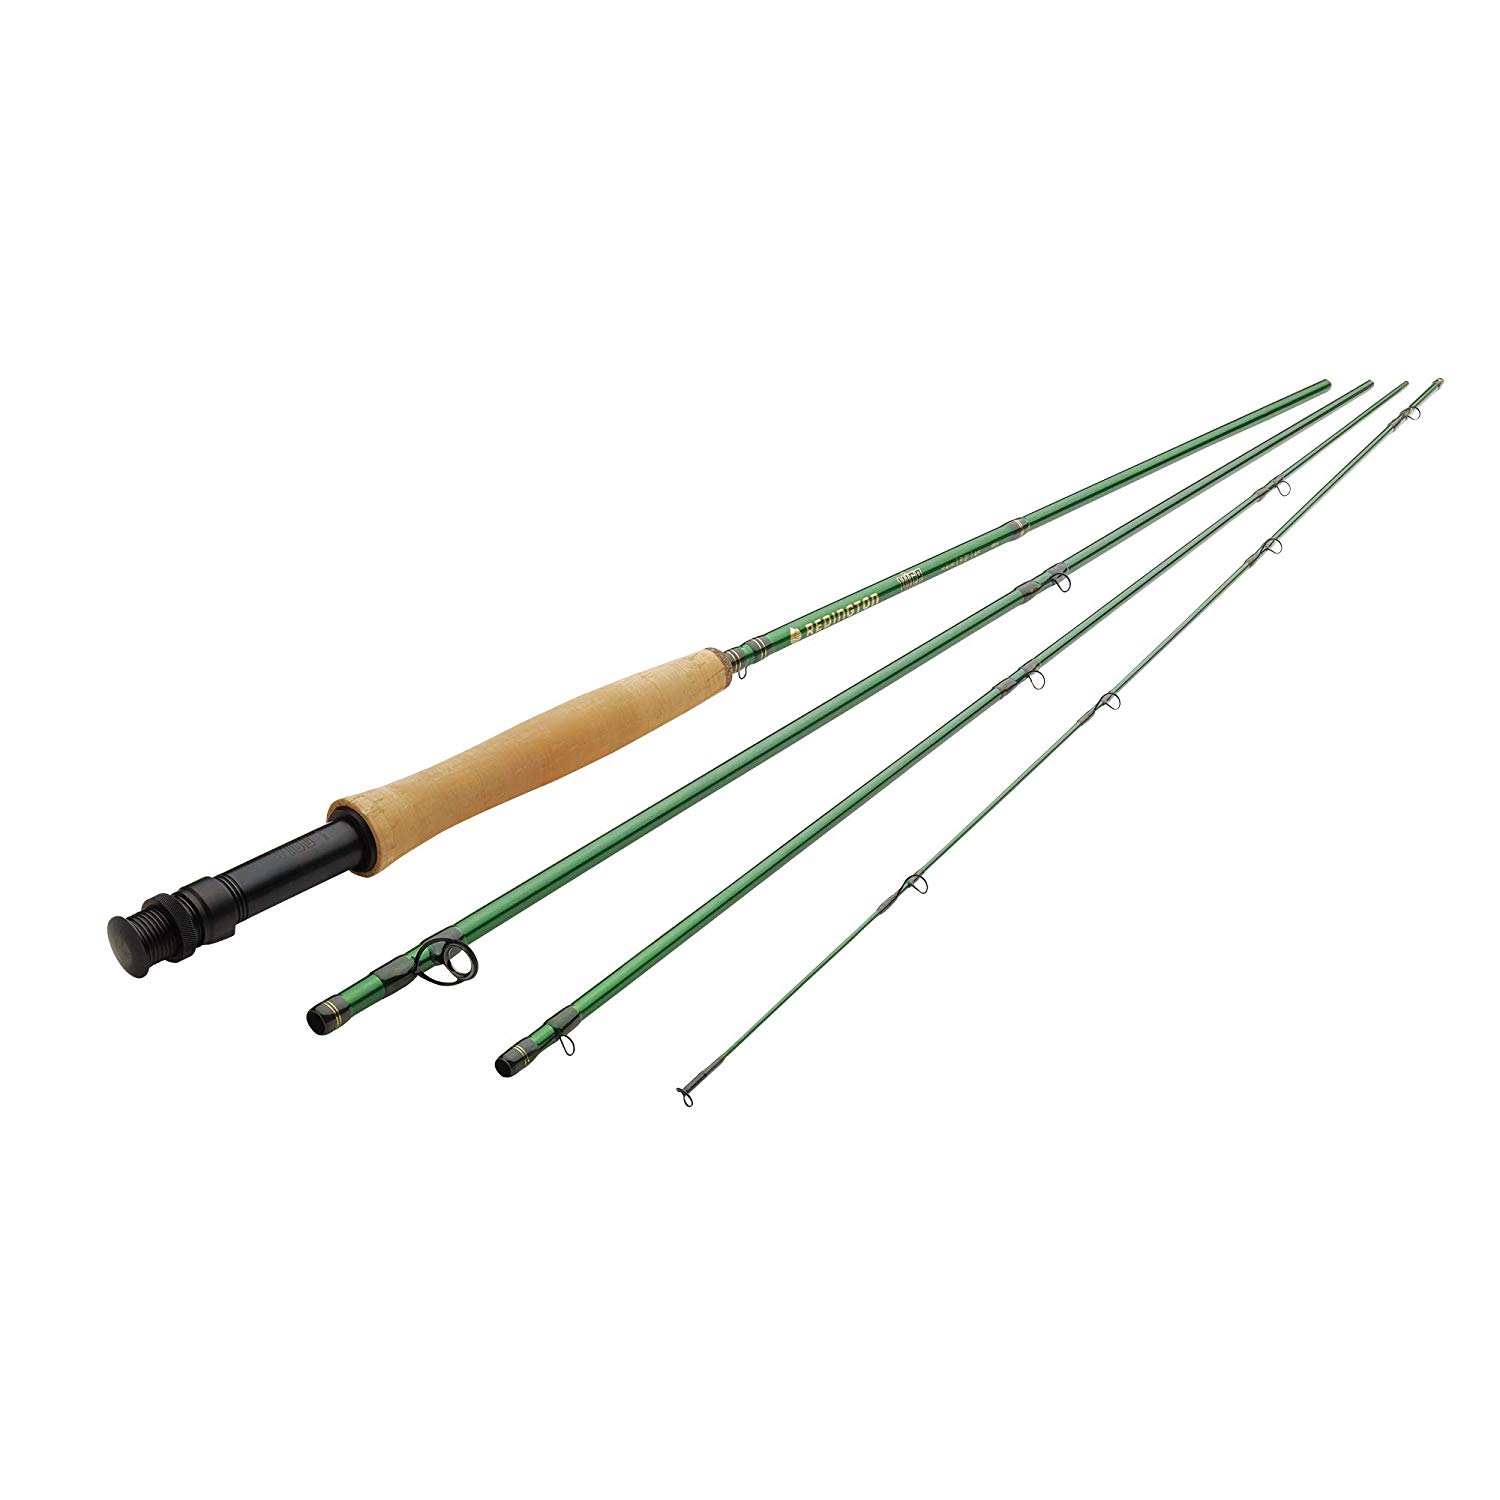 Fly Fishing Rods [Complete Guide] - Fish The Fly